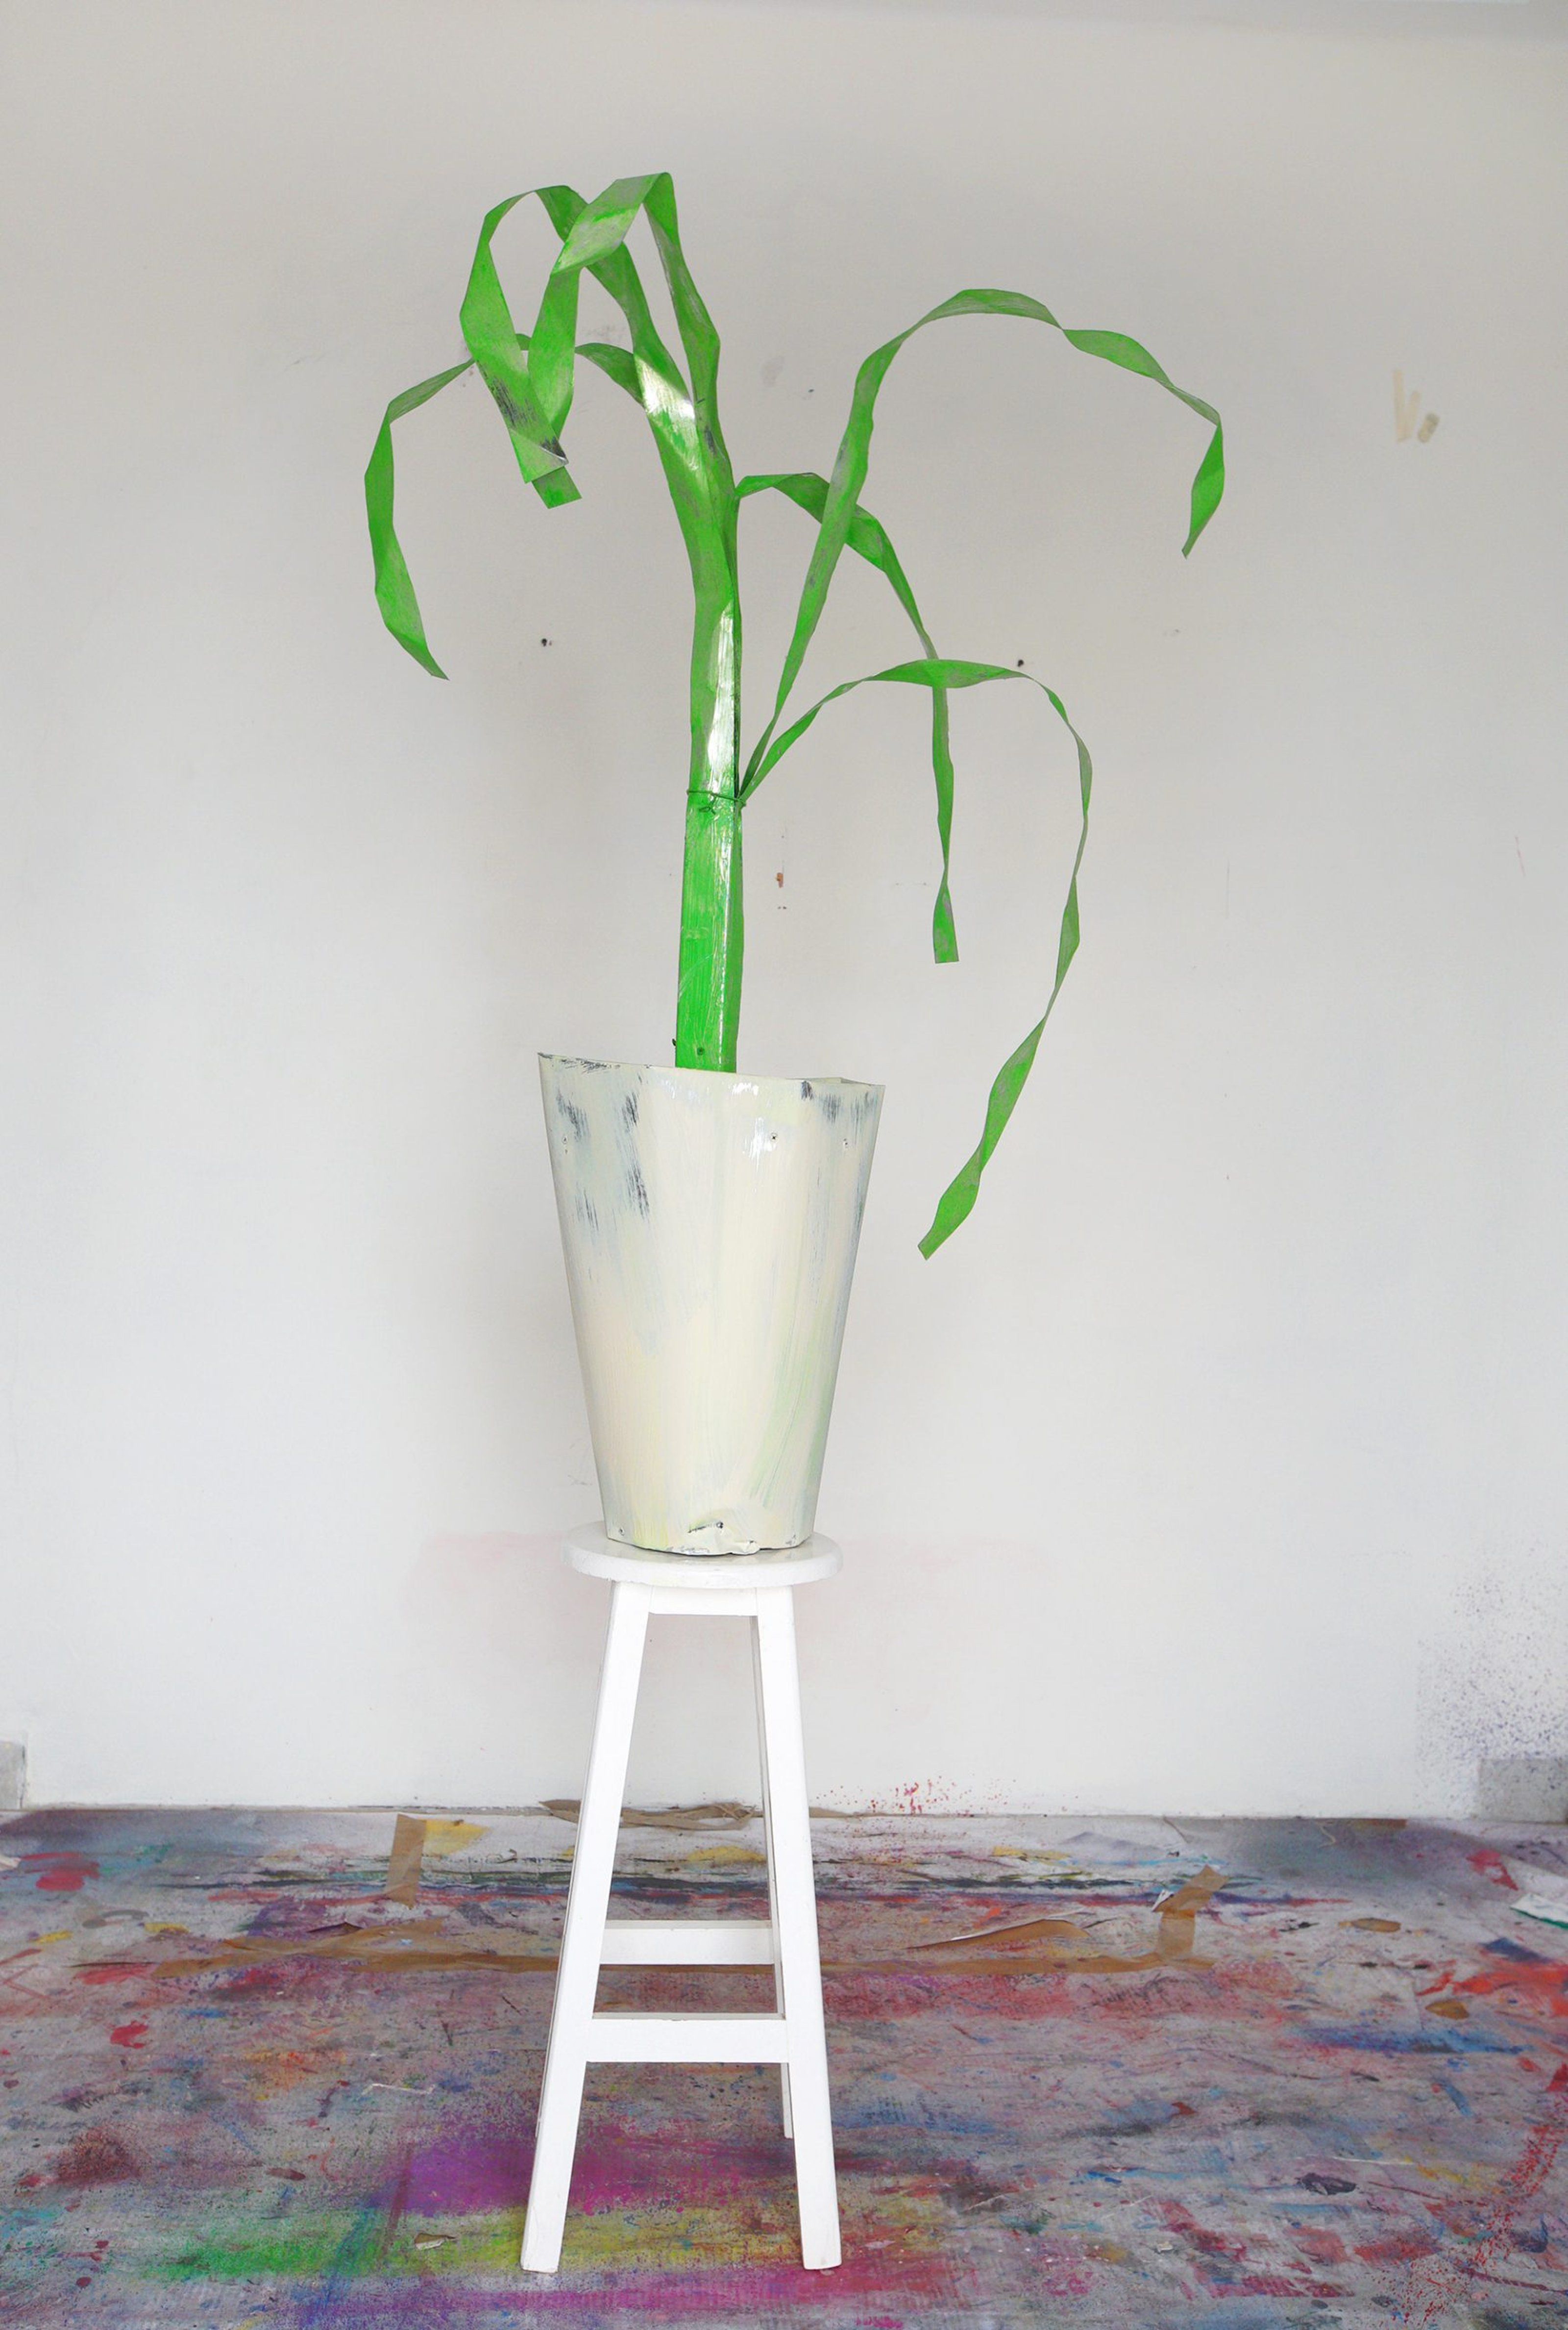 Sculpture of a potted plant, made from sheet metal, wood, oil paint. Placed in the artist's studio on a stool